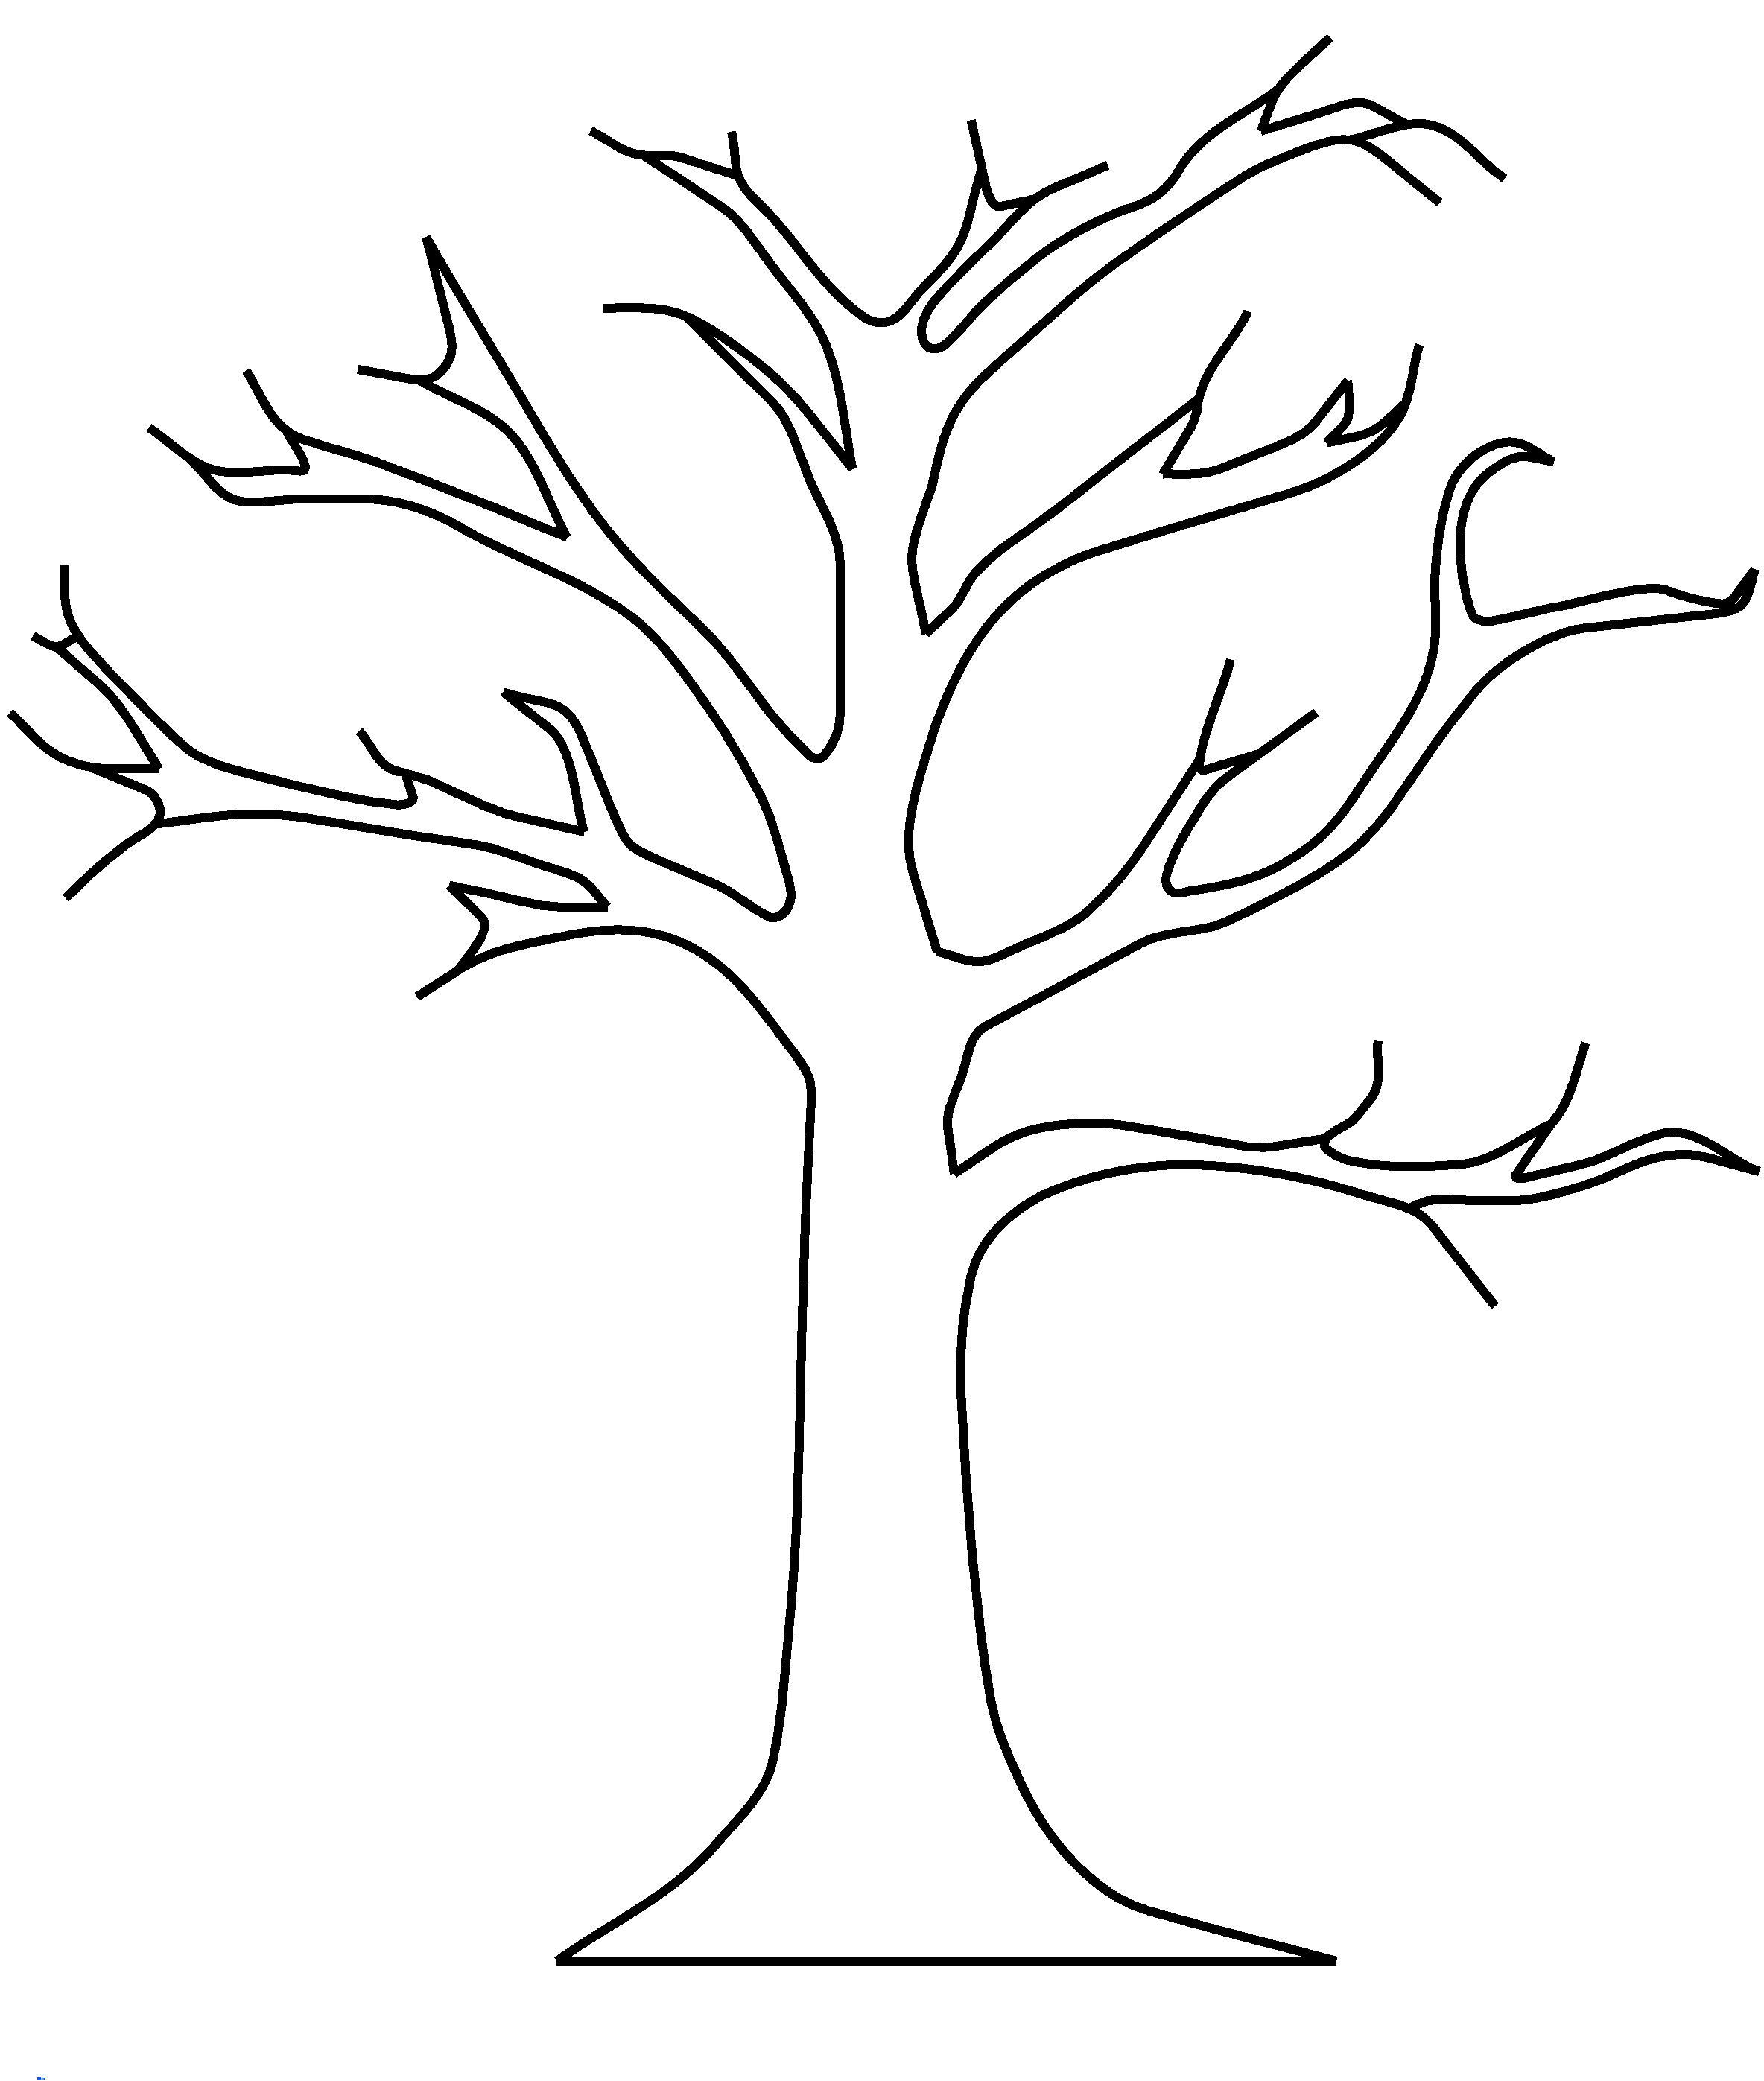 Free Leafless Tree Outline Printable, Download Free Clip Art